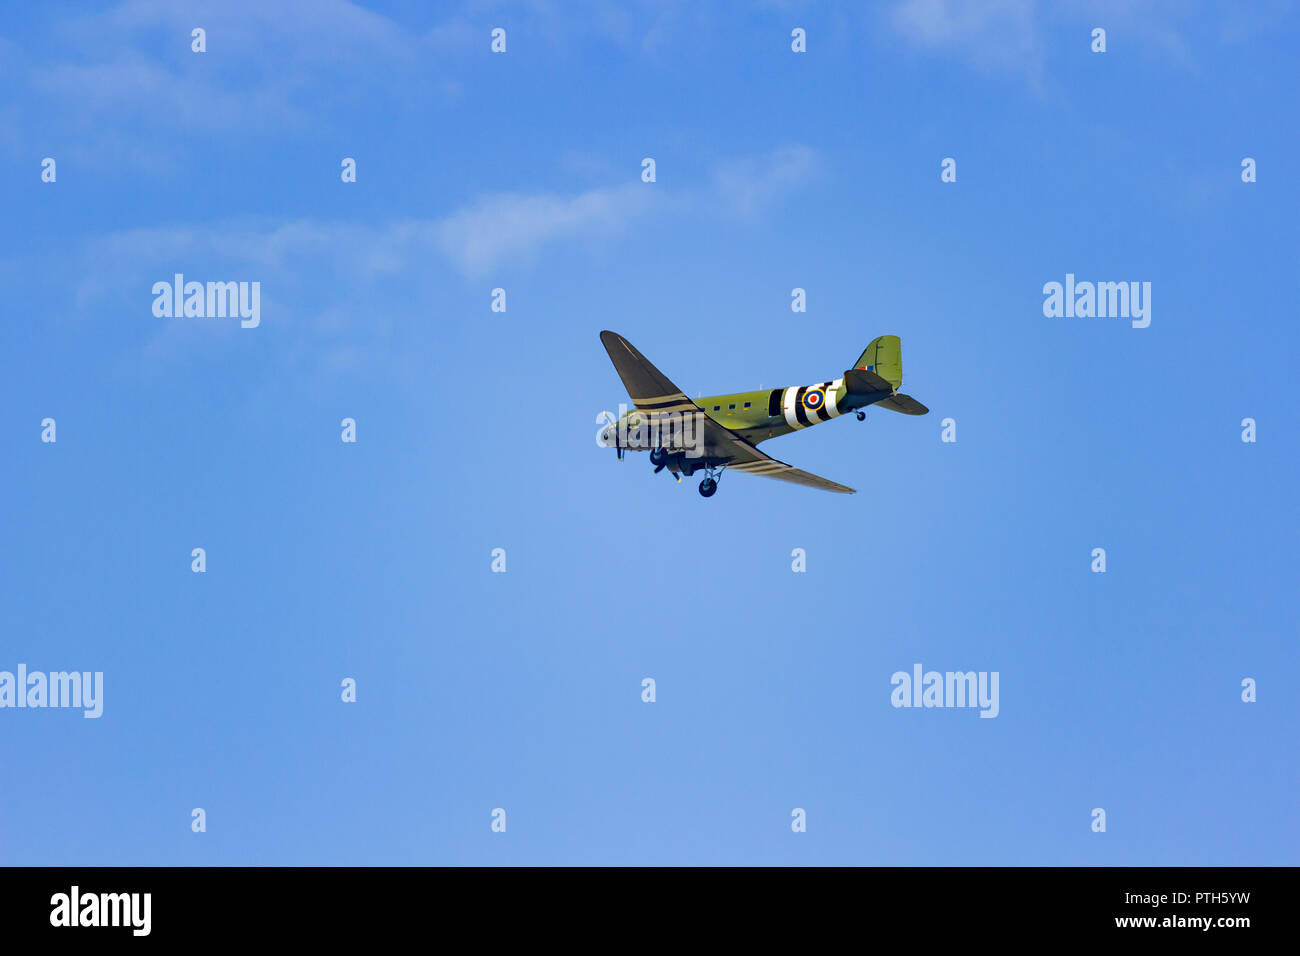 Dakota, douglas c-47, flying back from a display at the Bournemouth Air Show 2018, Dorset, UK Stock Photo